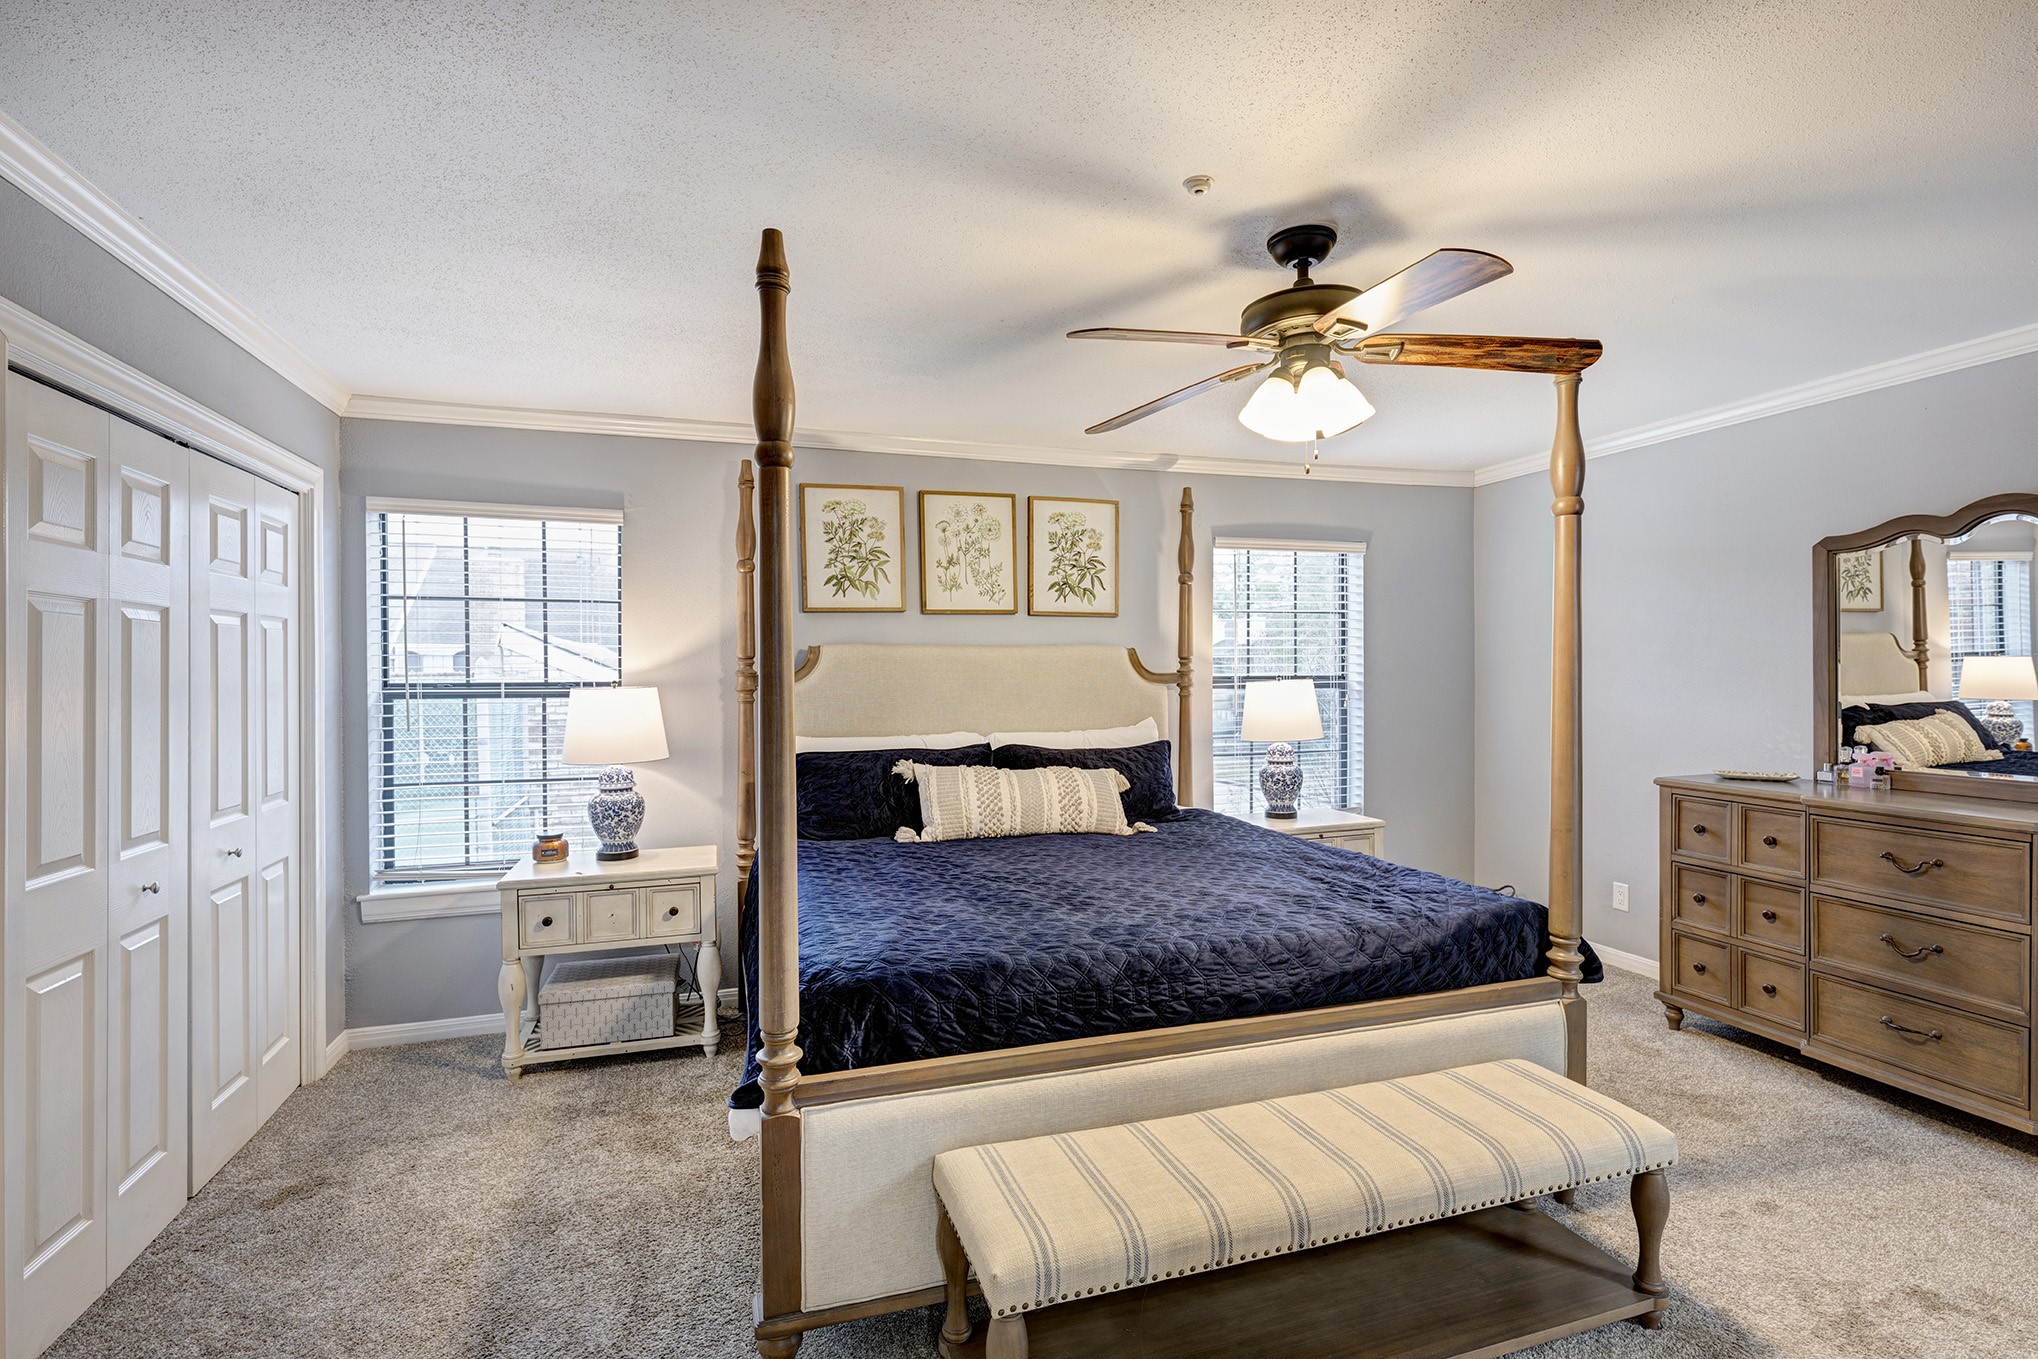 Nestled on the second level of the residence is a spacious primary bedroom measuring 16' x 14', complete with ample storage options on the left side for your clothing needs.